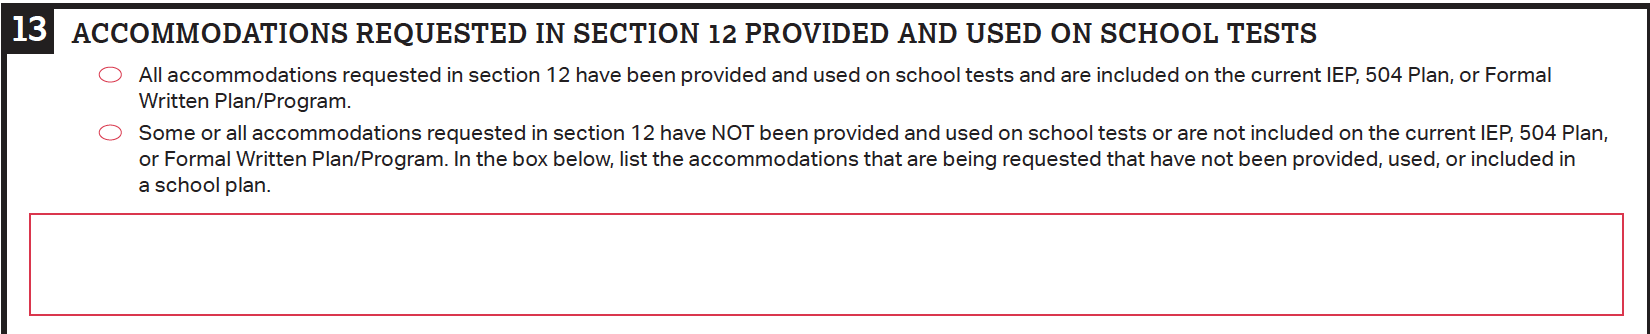 A screenshot of section 13, indicating whether the accommodations have been provided for school tests, on the paper Student Eligibility Form